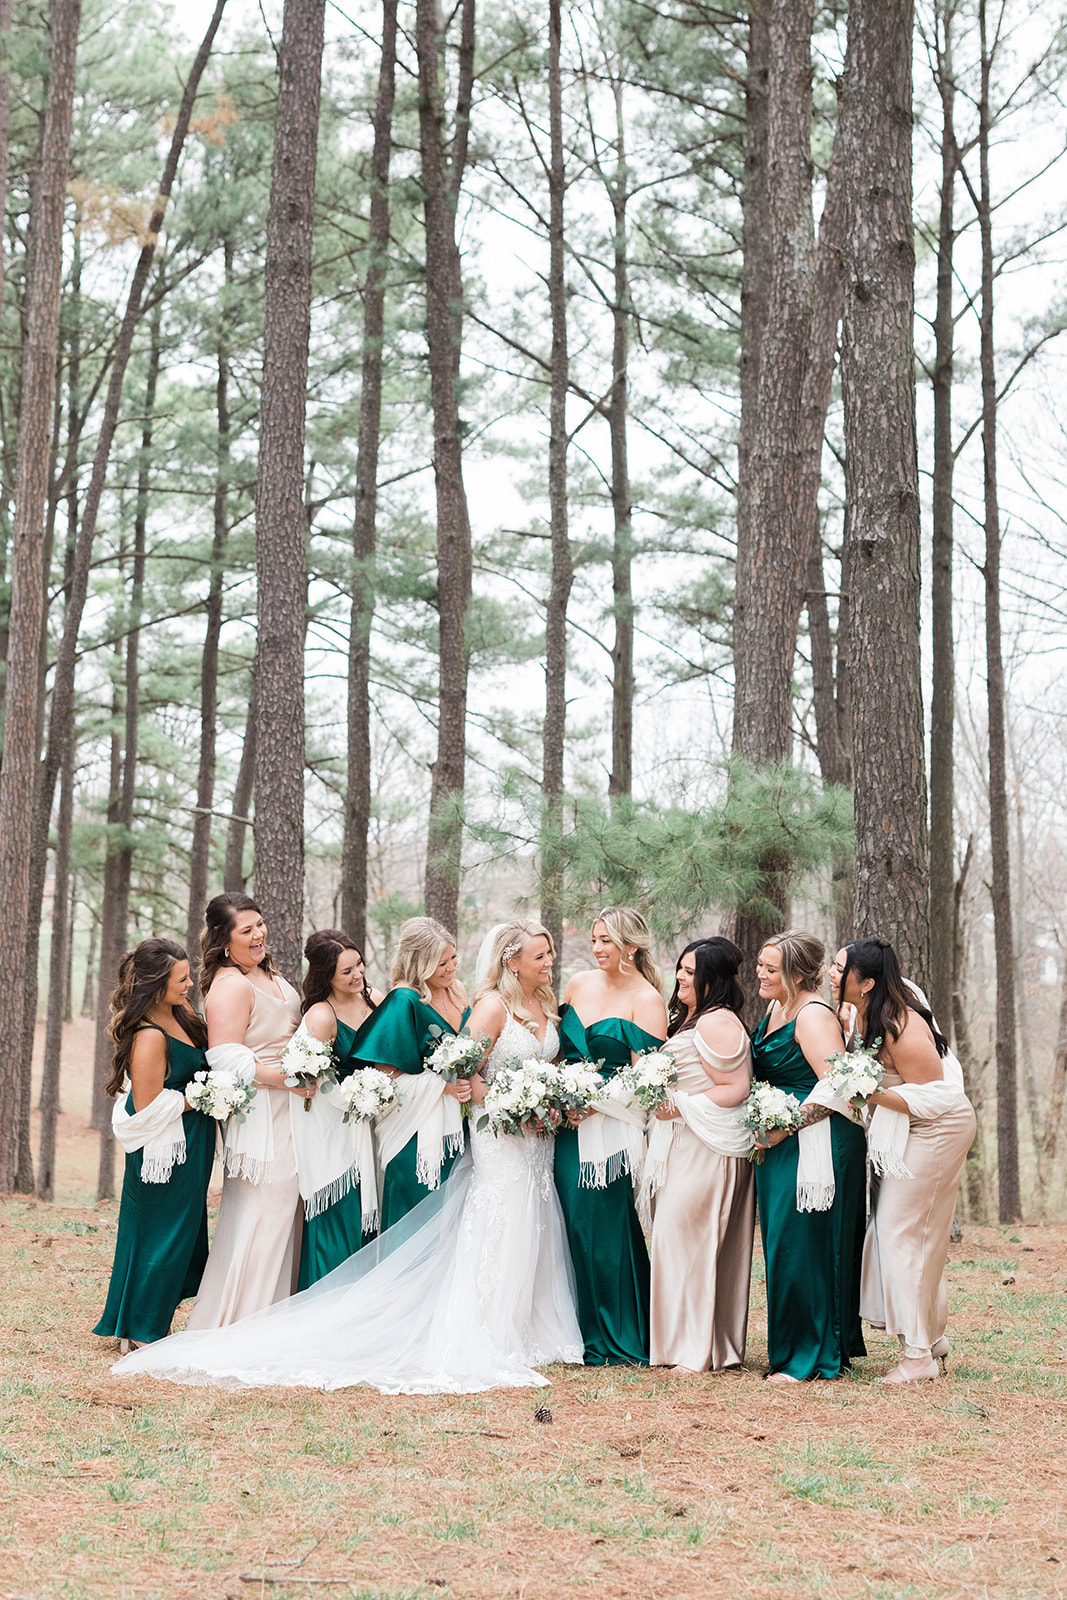 Bride and bridesmaids with scarves and emerald green bridesmaid dresses